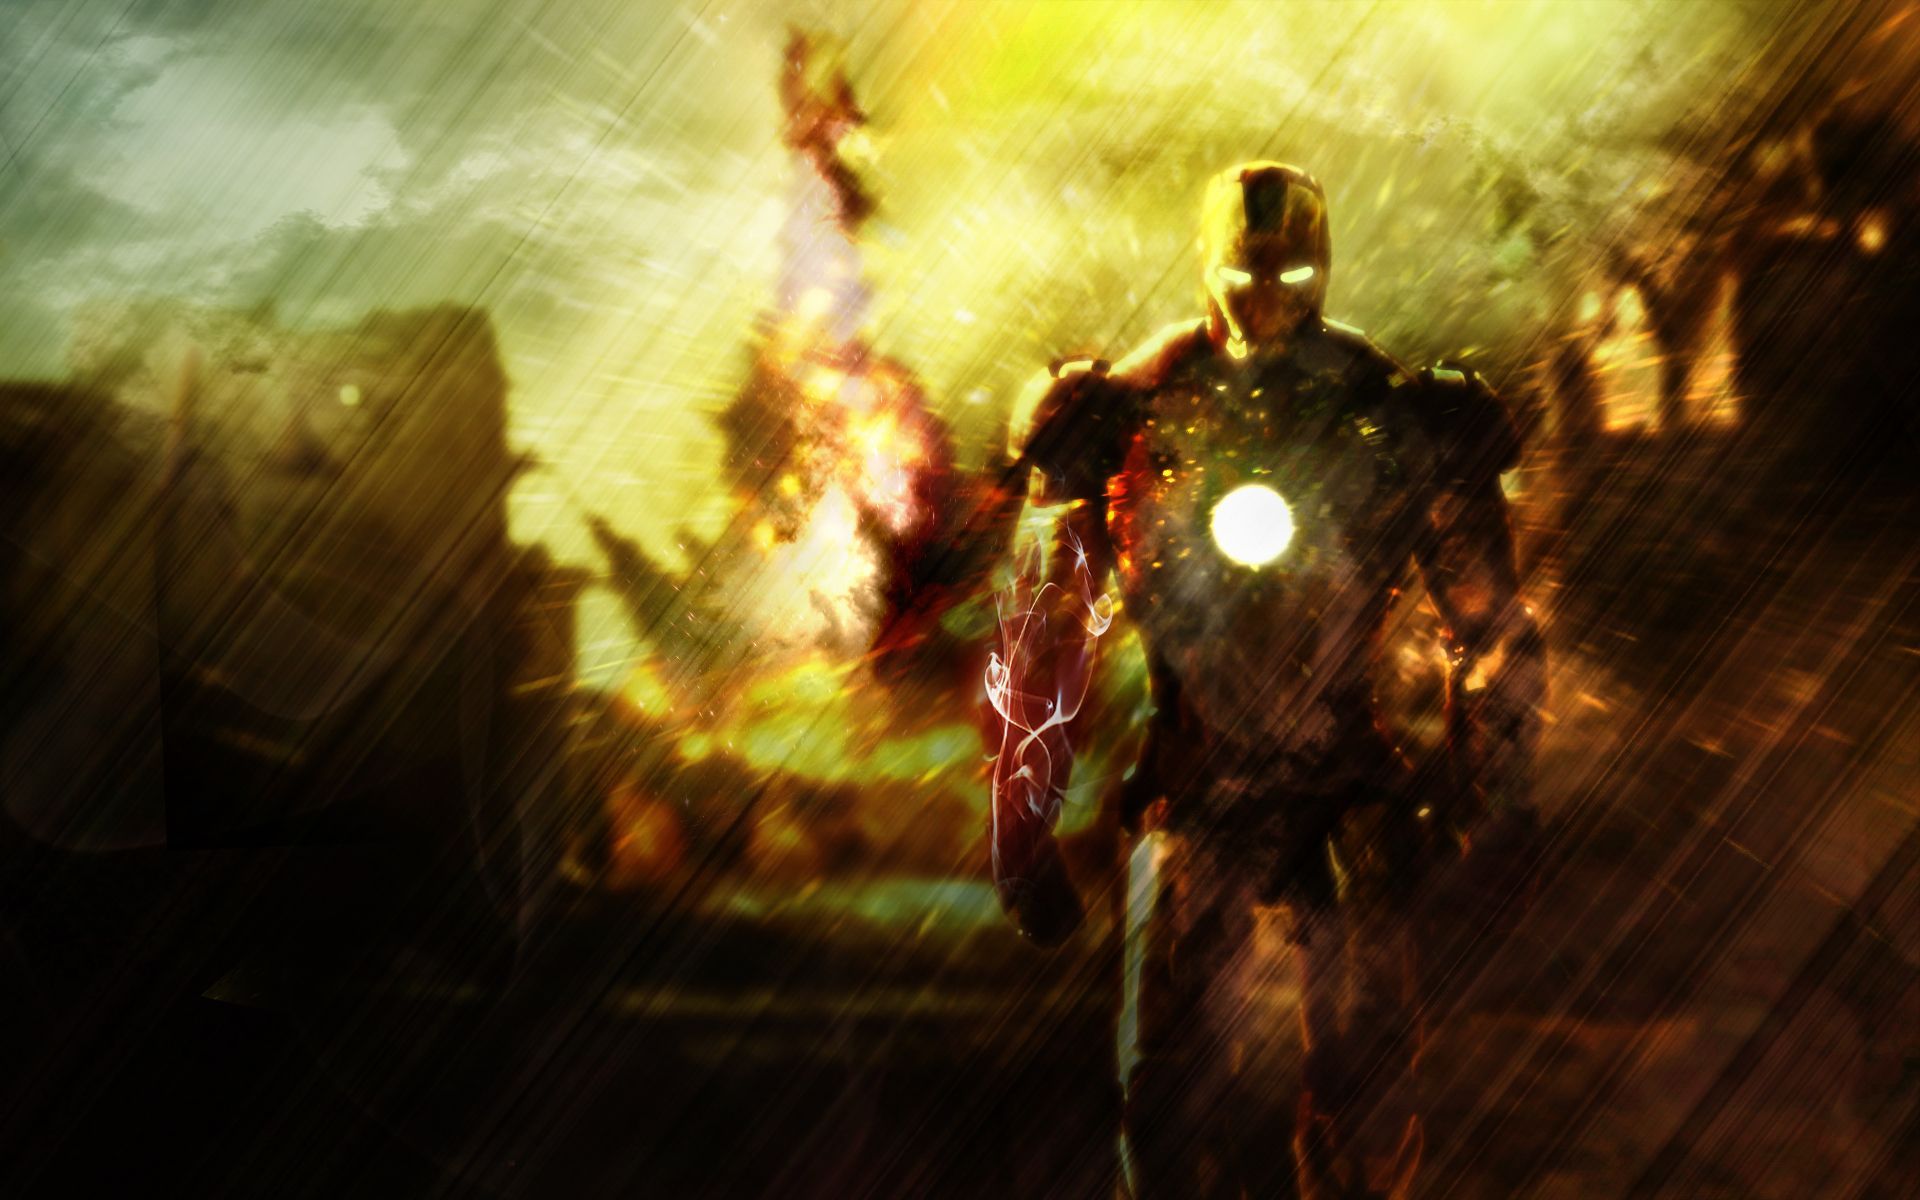 Iron man 3 wallpapers HD | Wallpapers, Backgrounds, Images, Art ...